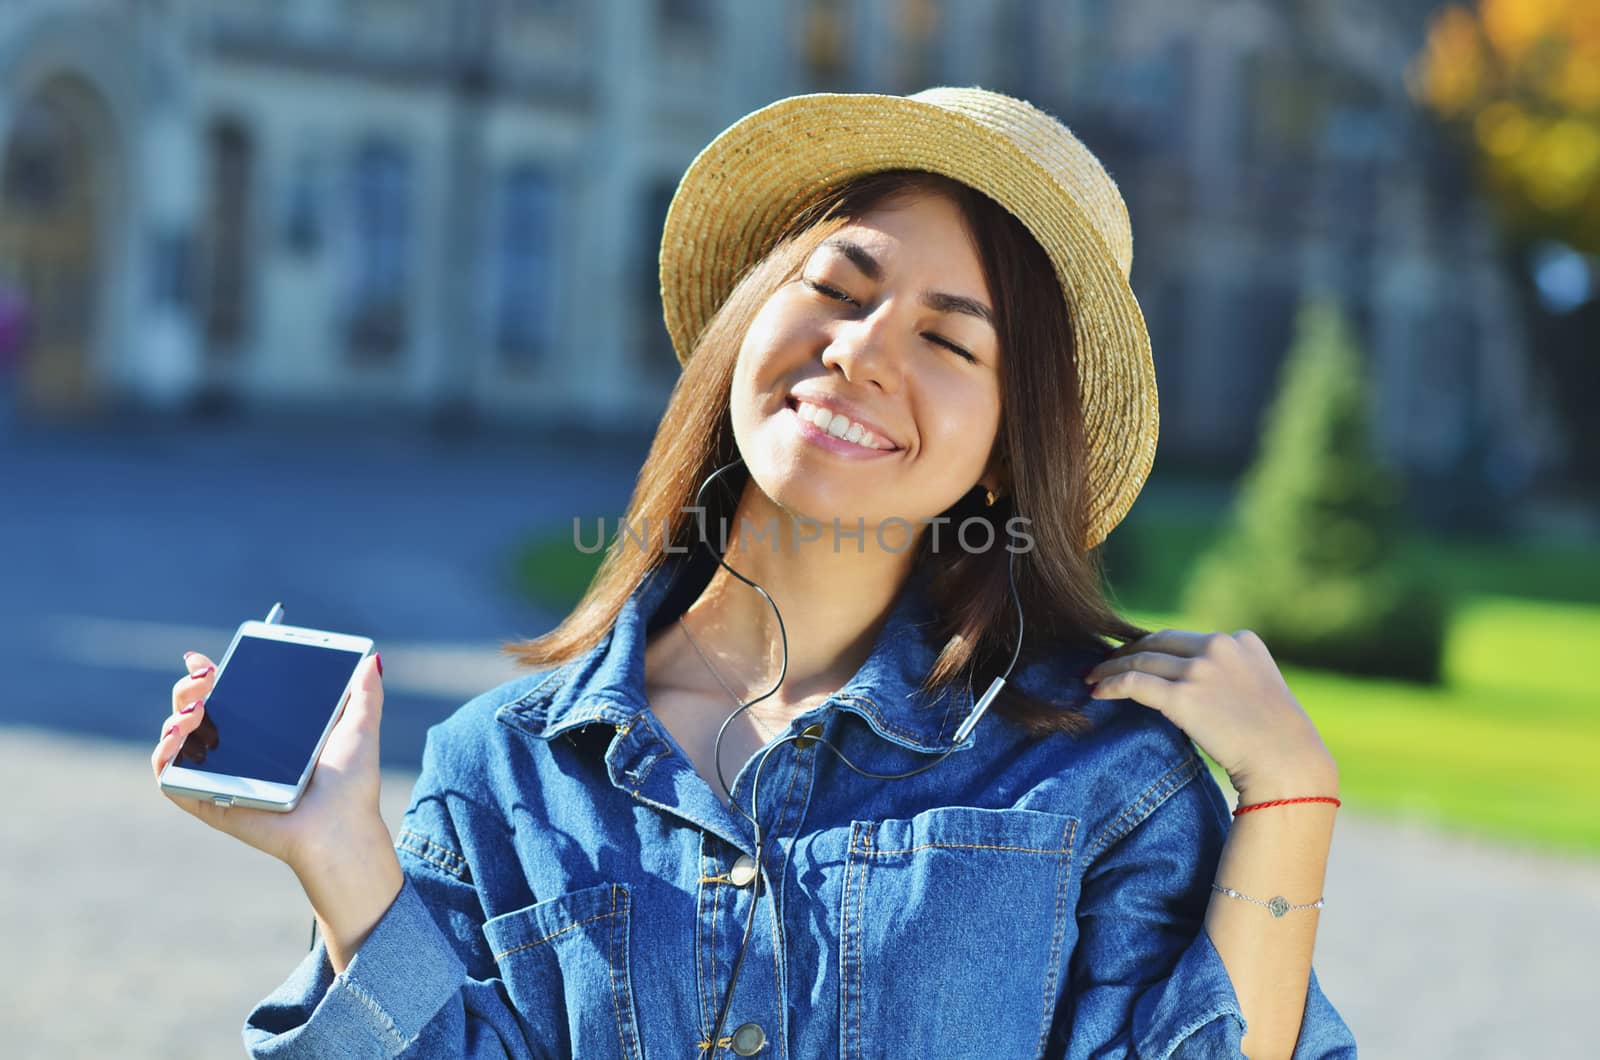 A young girl of Asian appearance enjoys life and listens to music by xzgorik